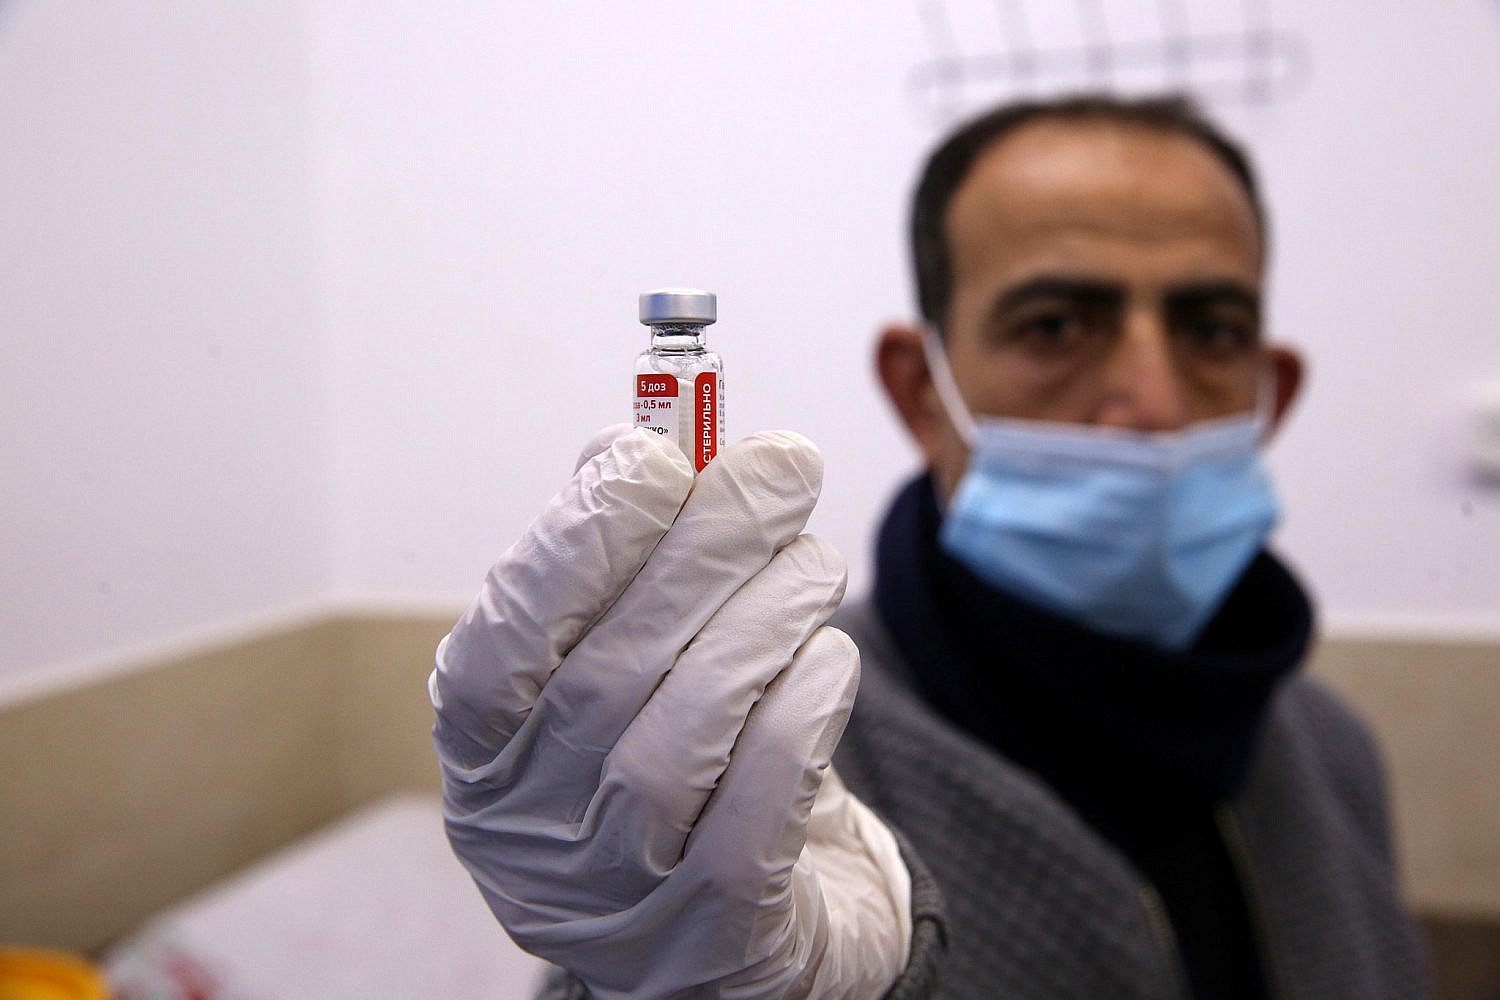 Palestinian medical workers receive Sputnik V vaccine against Covid-19 in a Palestinian Red Crescent Hospital in the West Bank city of Hebron, March 4, 2021. (Wissam Hashlamoun/Flash90)